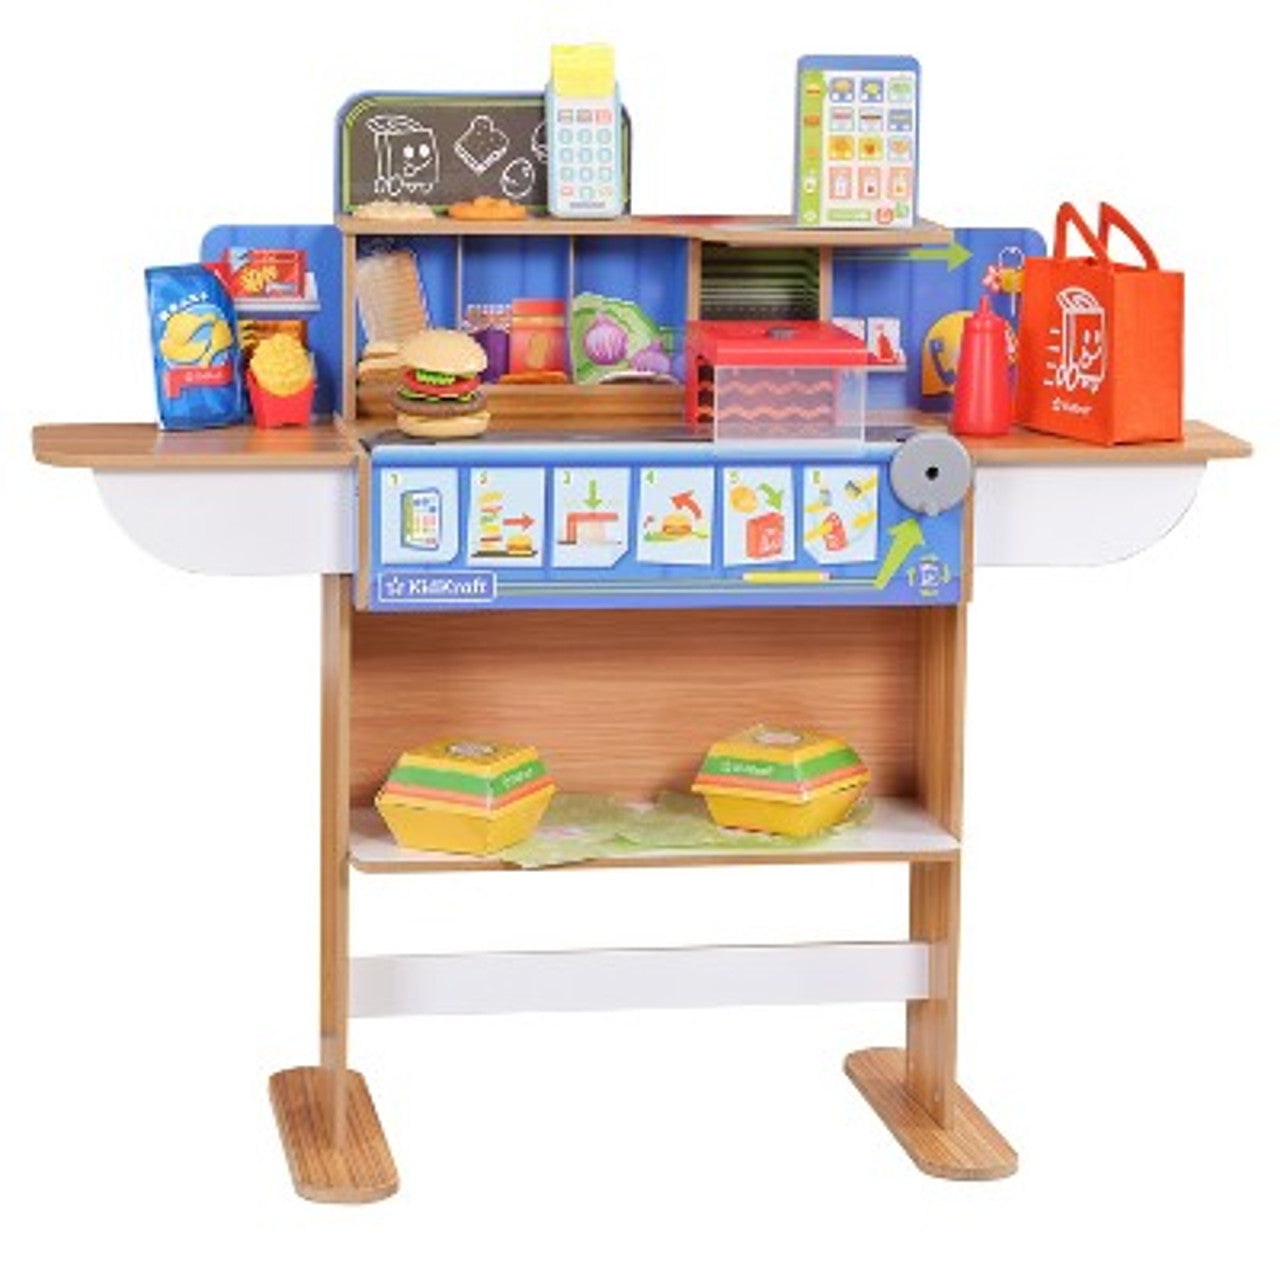 New - KidKraft 2-in-1 Restaurant & Delivery Wooden Play Store